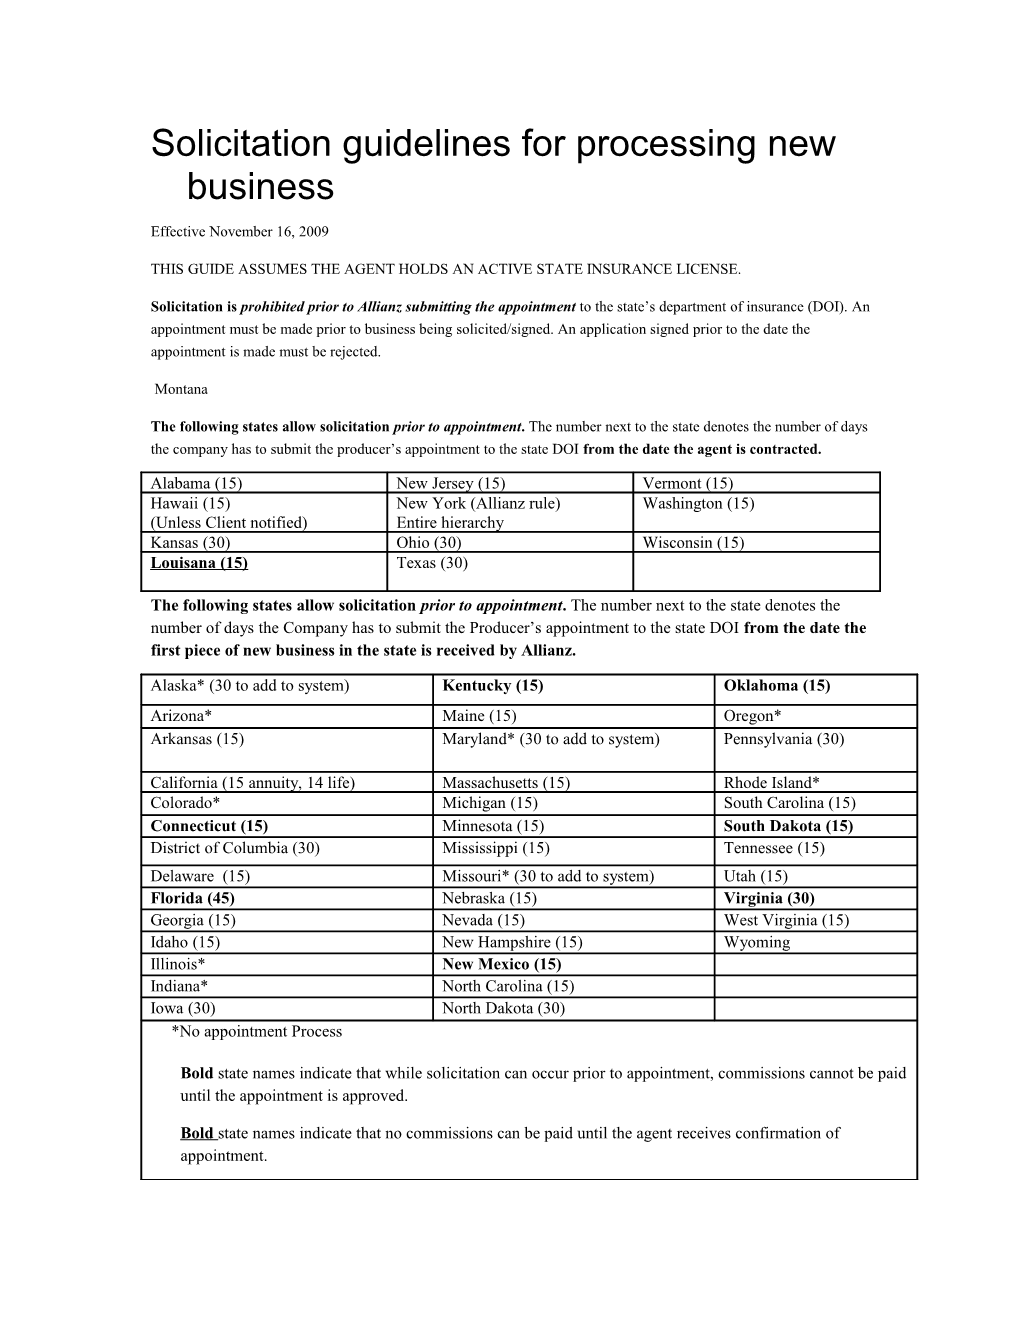 Solicitation Guidelines for Processing New Business